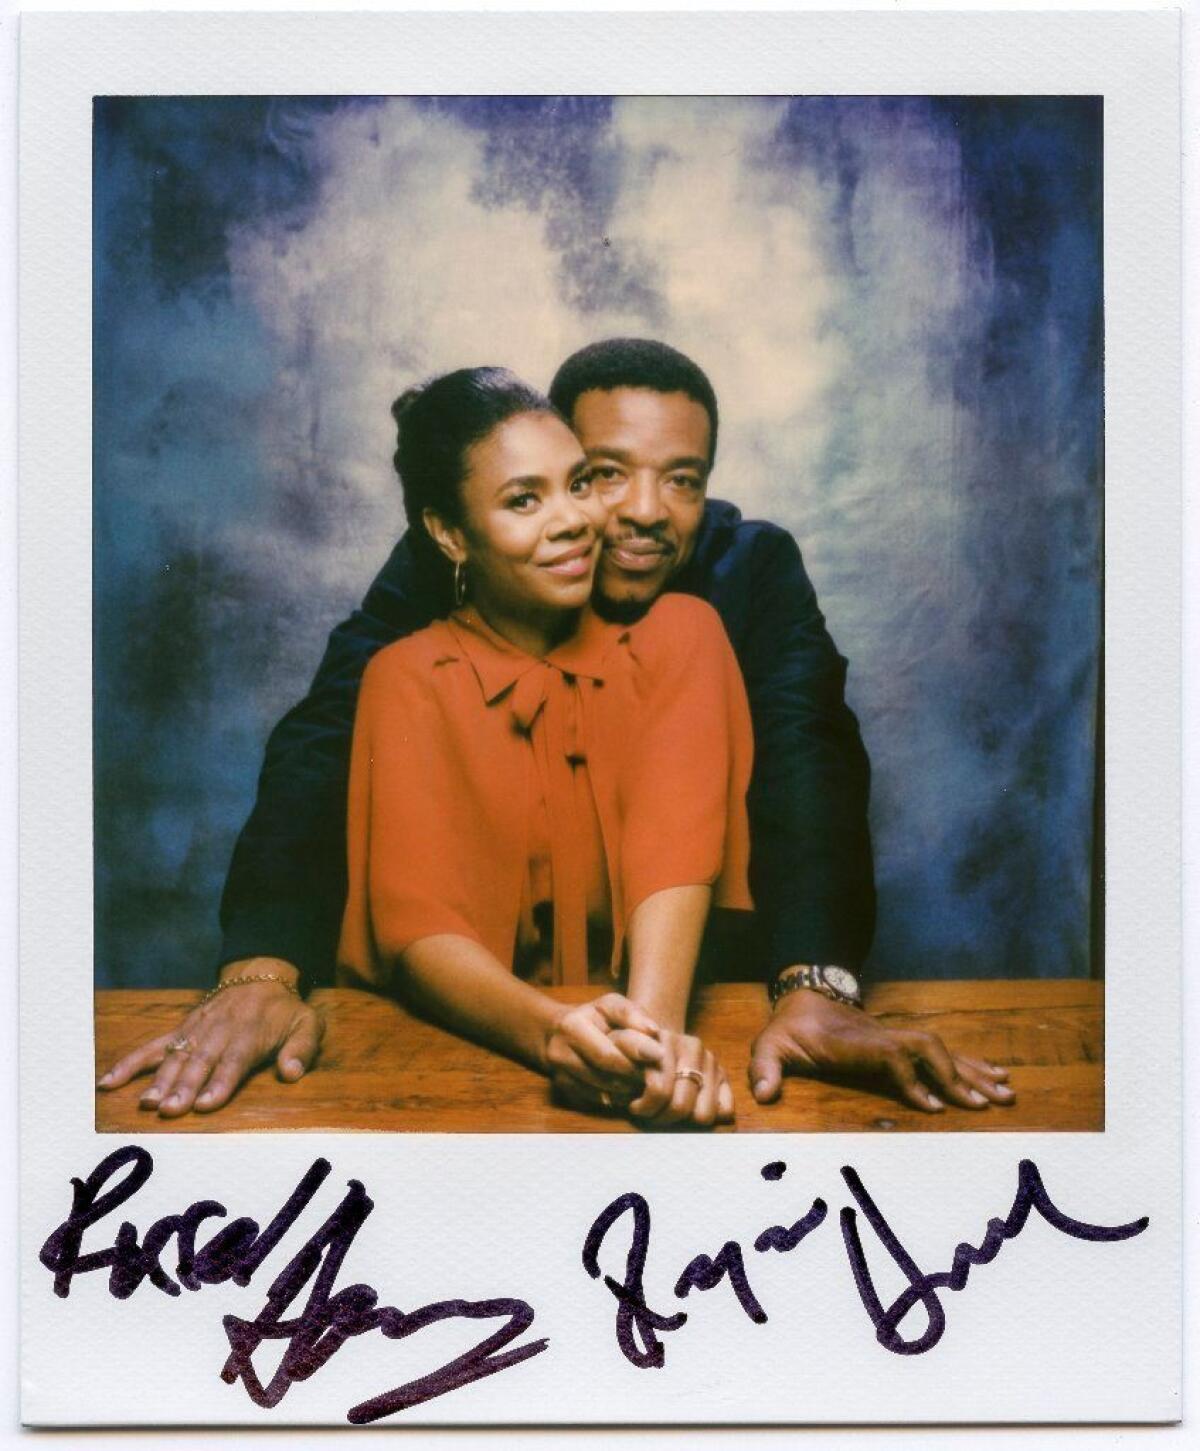 A Polaroid of "The Hate U Give" costars Regina Hall and Russell Hornsby.